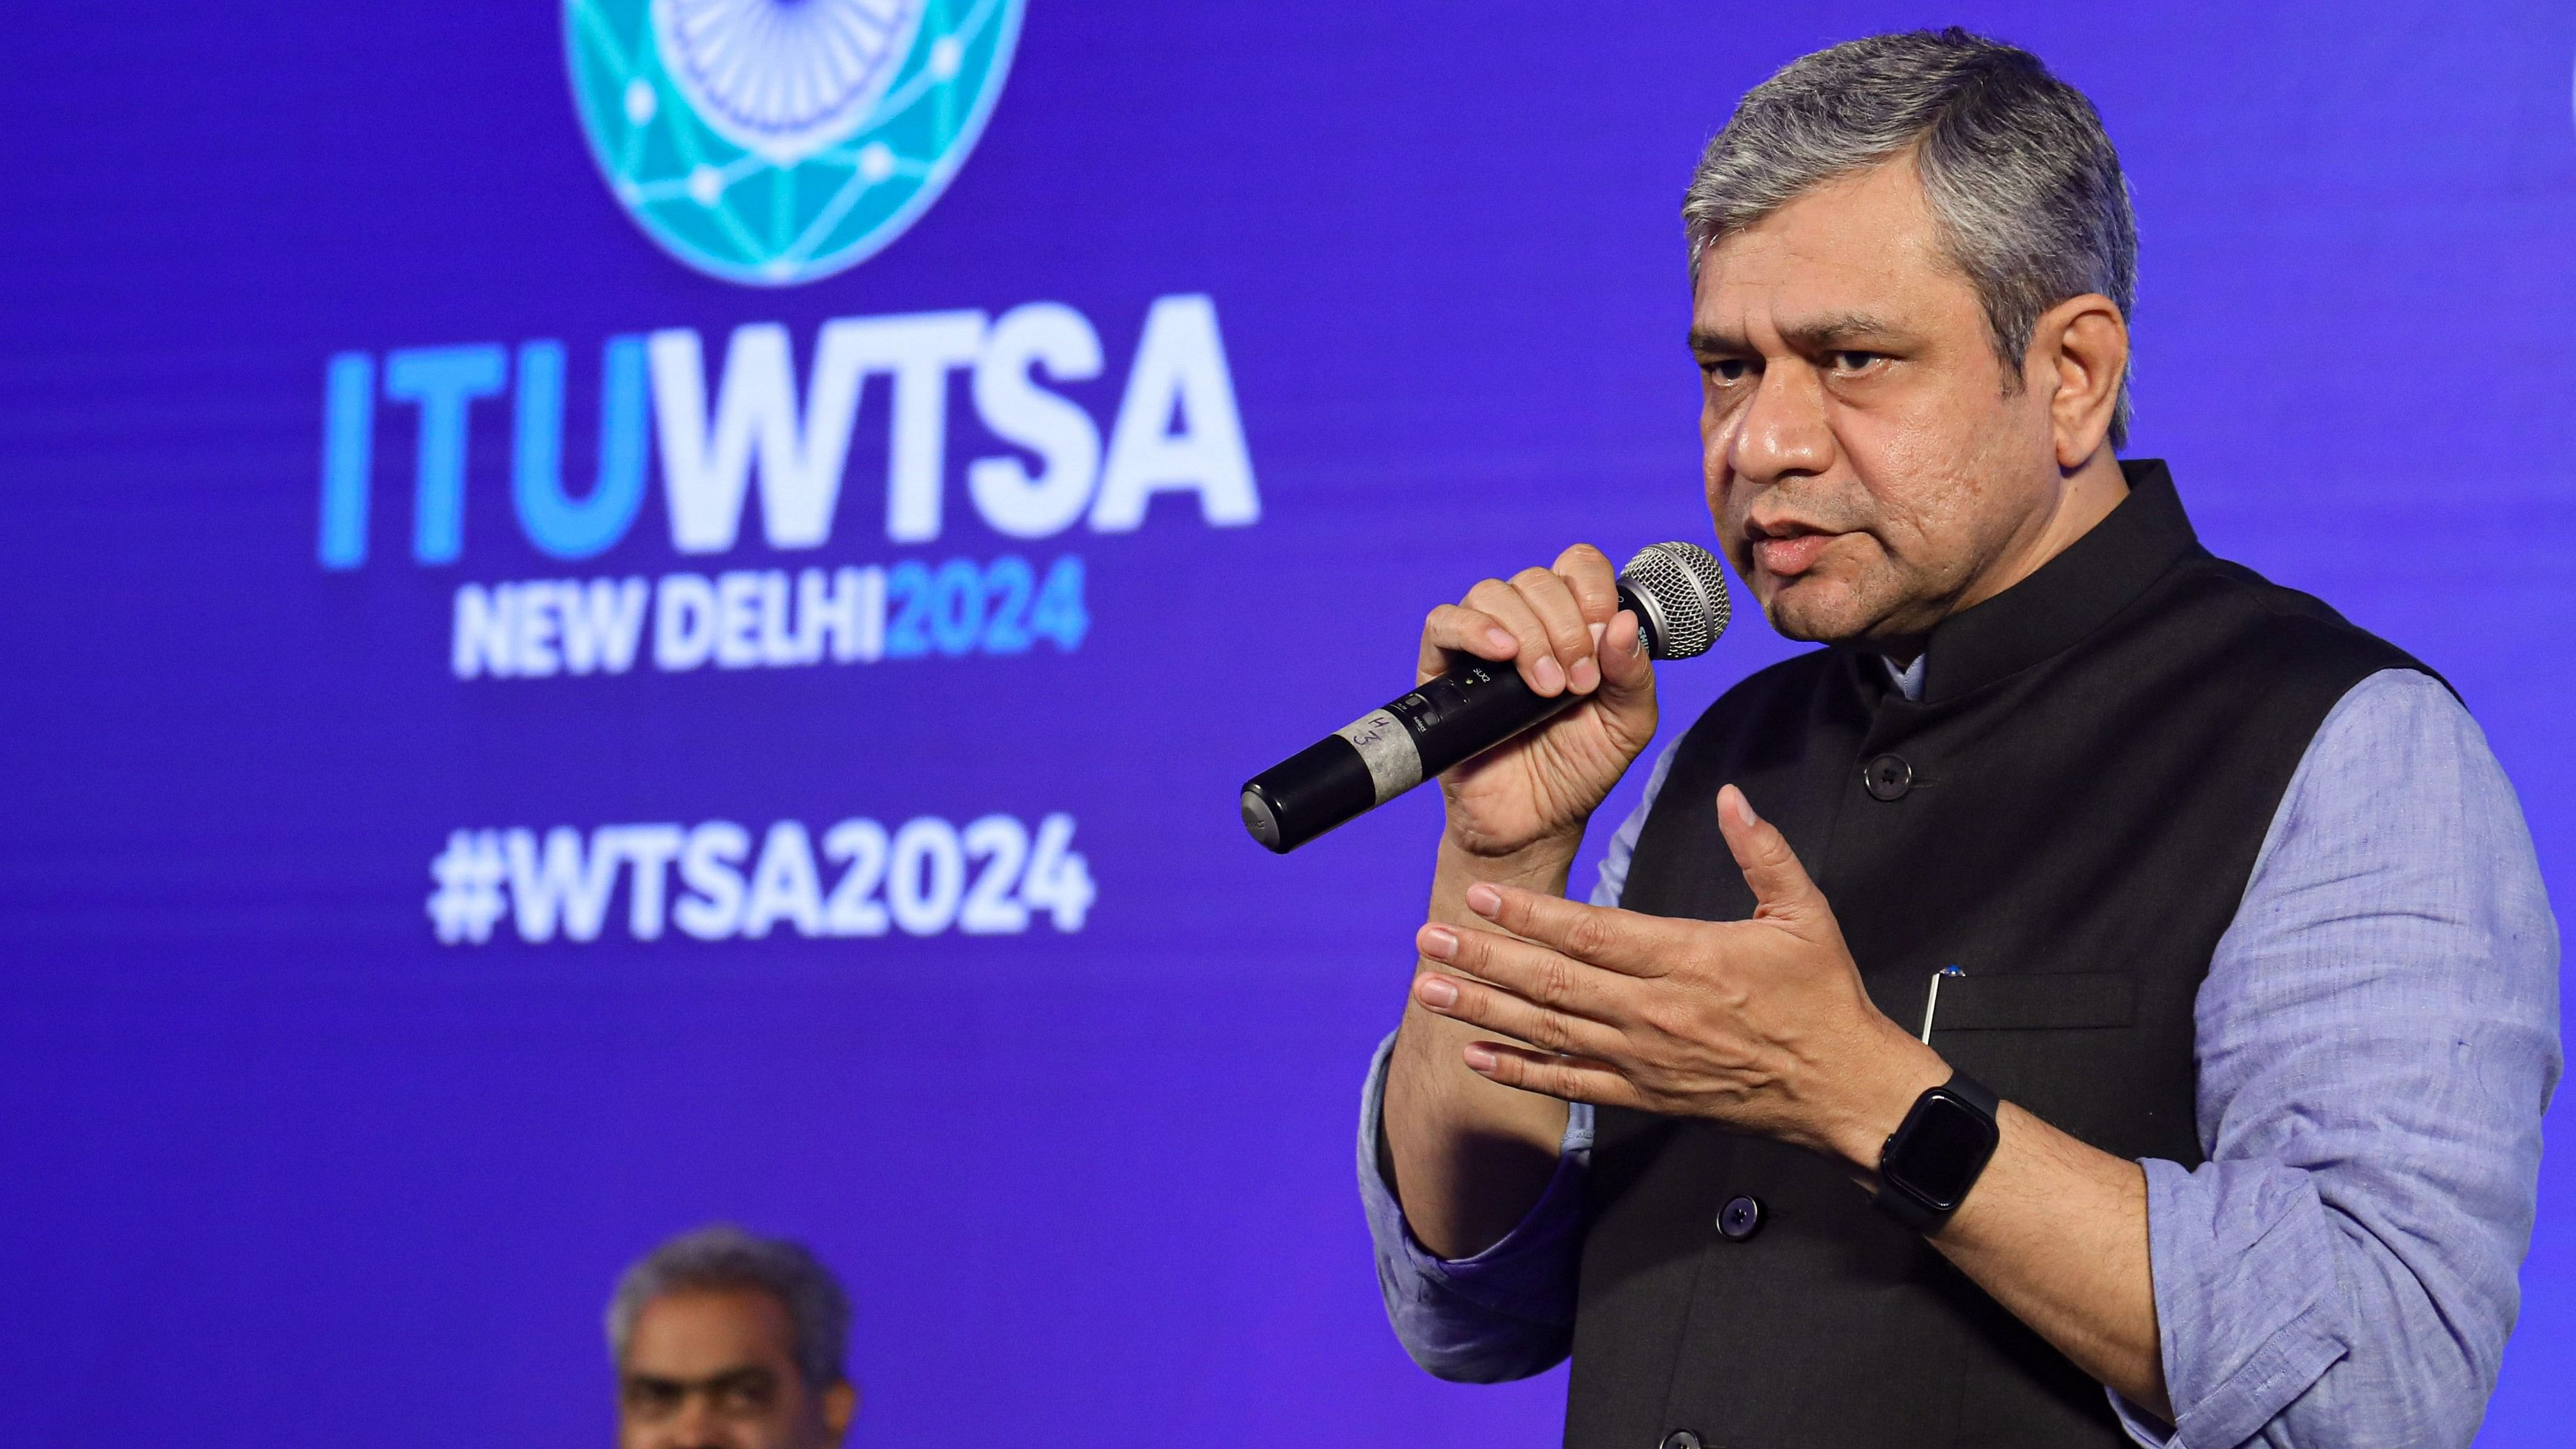 <div class="paragraphs"><p>Union Minister for Communications, and Electronics &amp; Information Technology Ashwini Vaishnaw speaks during the curtain raiser event of the India Mobile Congress 2024 and World Telecommunication Standardisation Assembly (ITU-WTSA) 2024, in New Delhi, on Monday.</p></div>